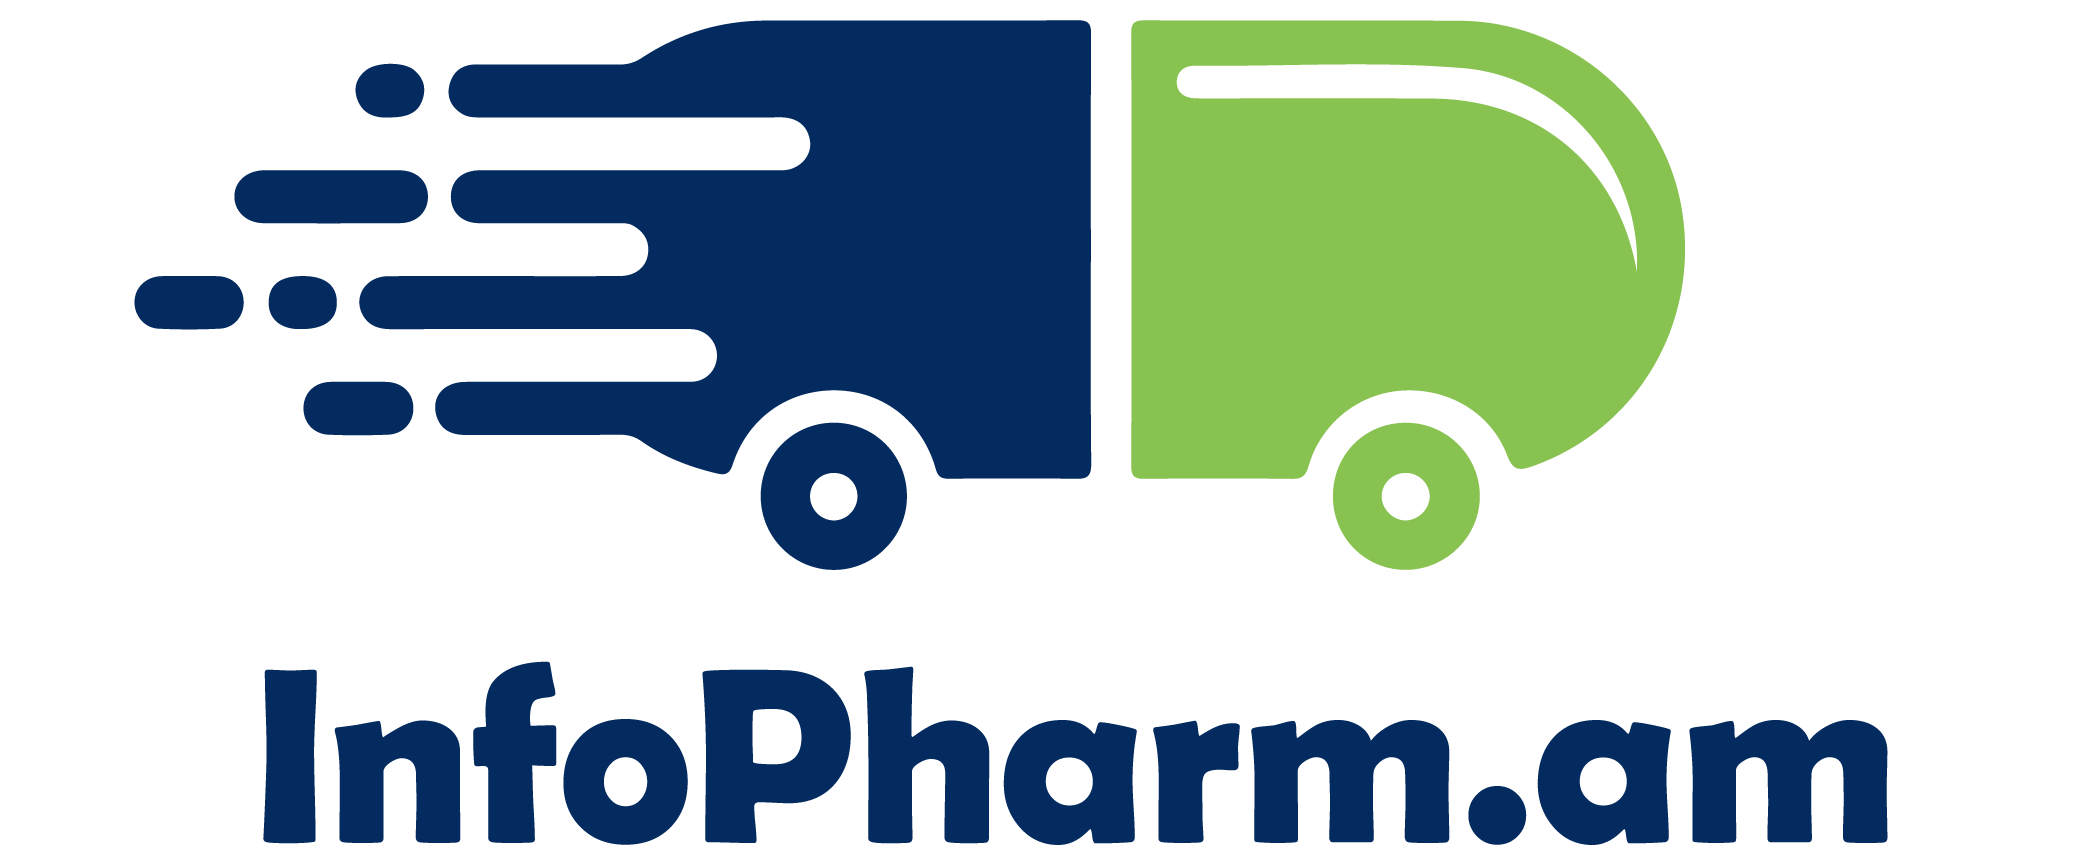 cropped-Infopharm.am_logo-02-1-e1612211876125.png